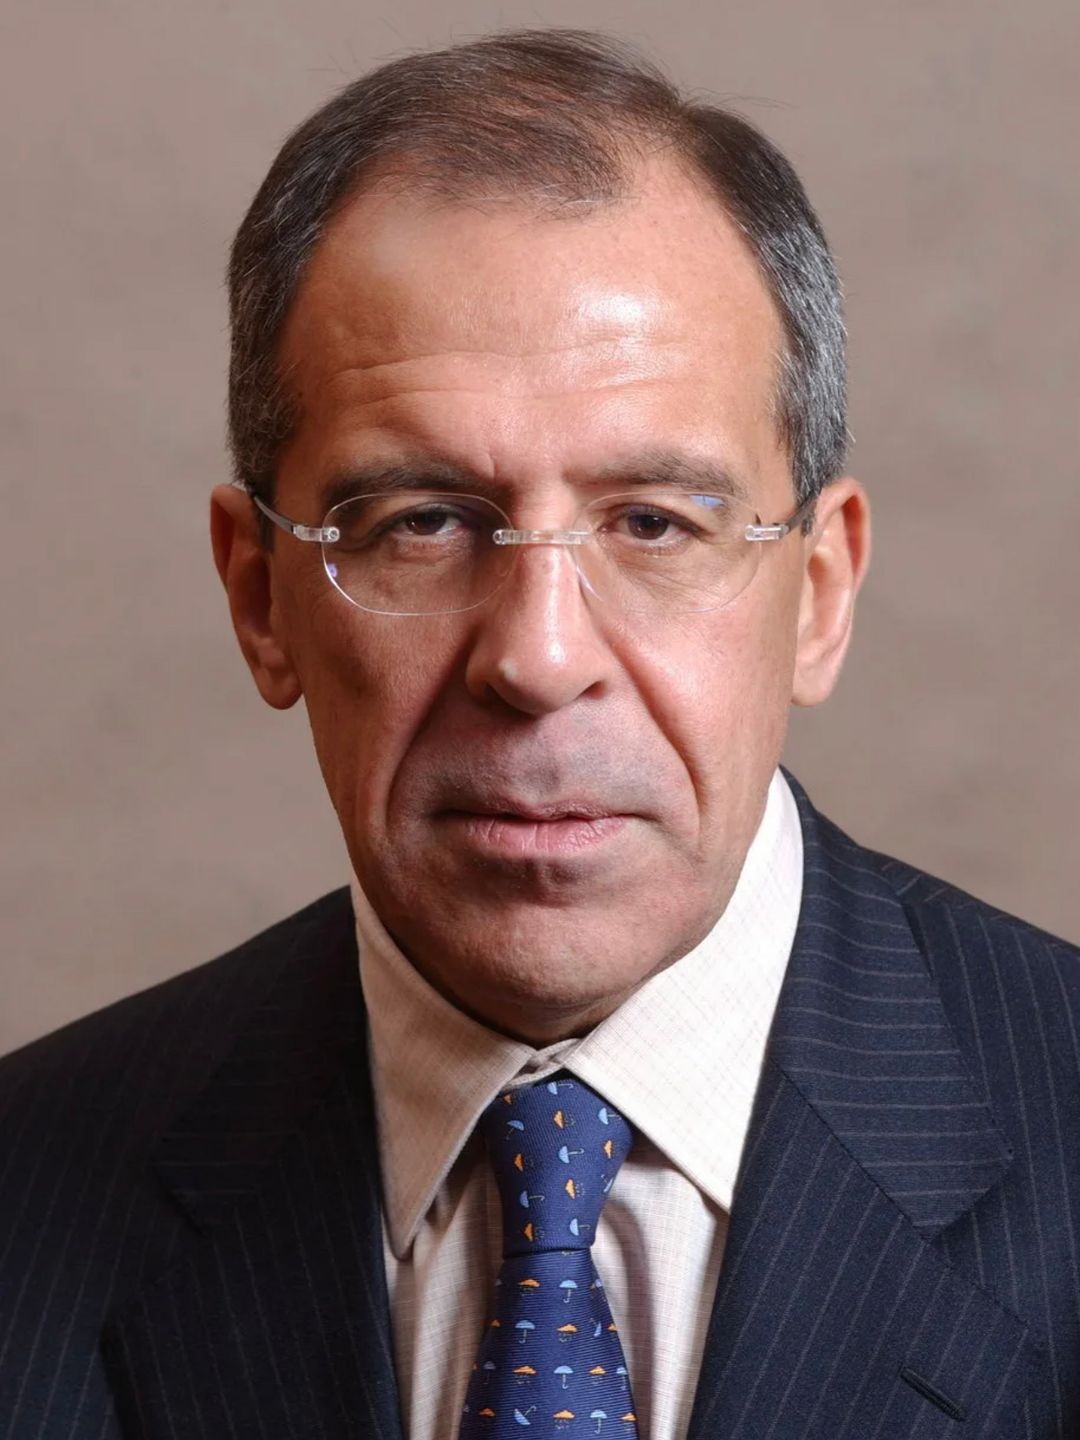 Sergey Lavrov height and weight